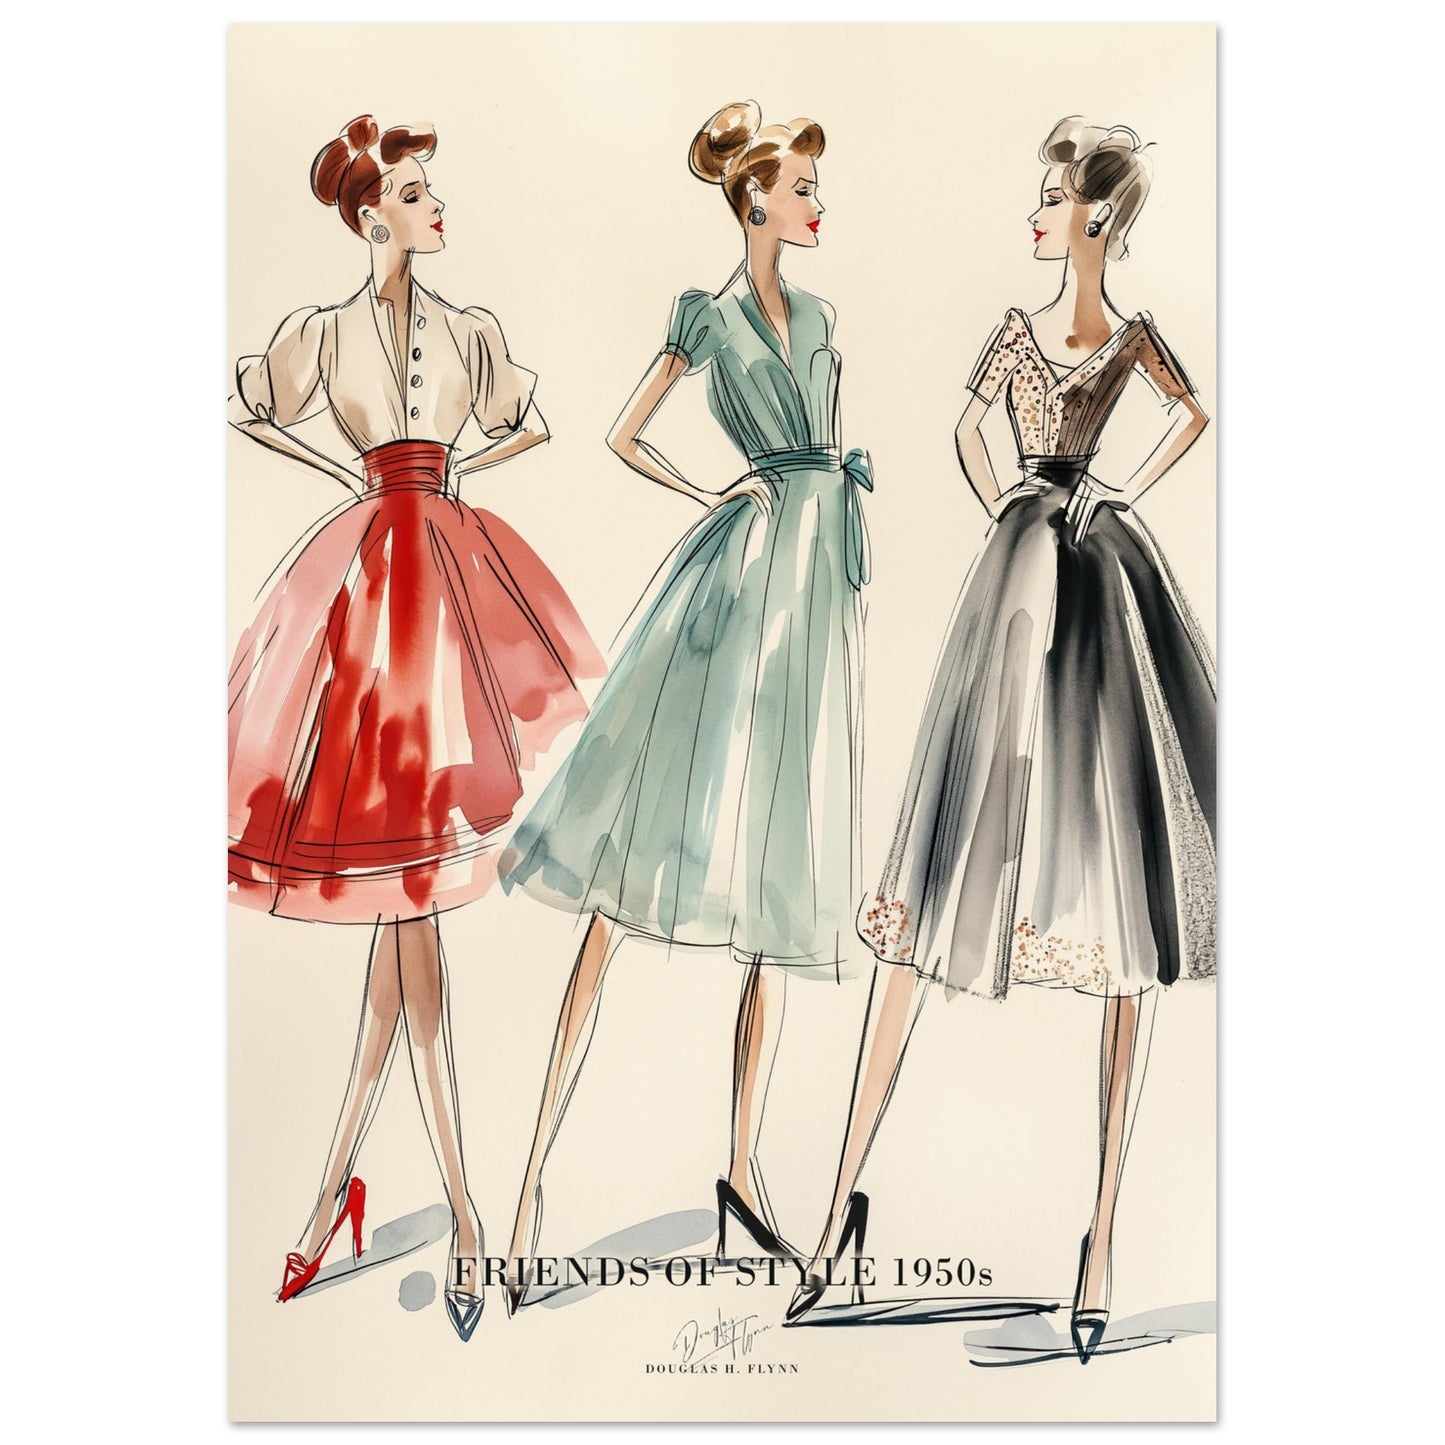 »Friends of Style 1950s«